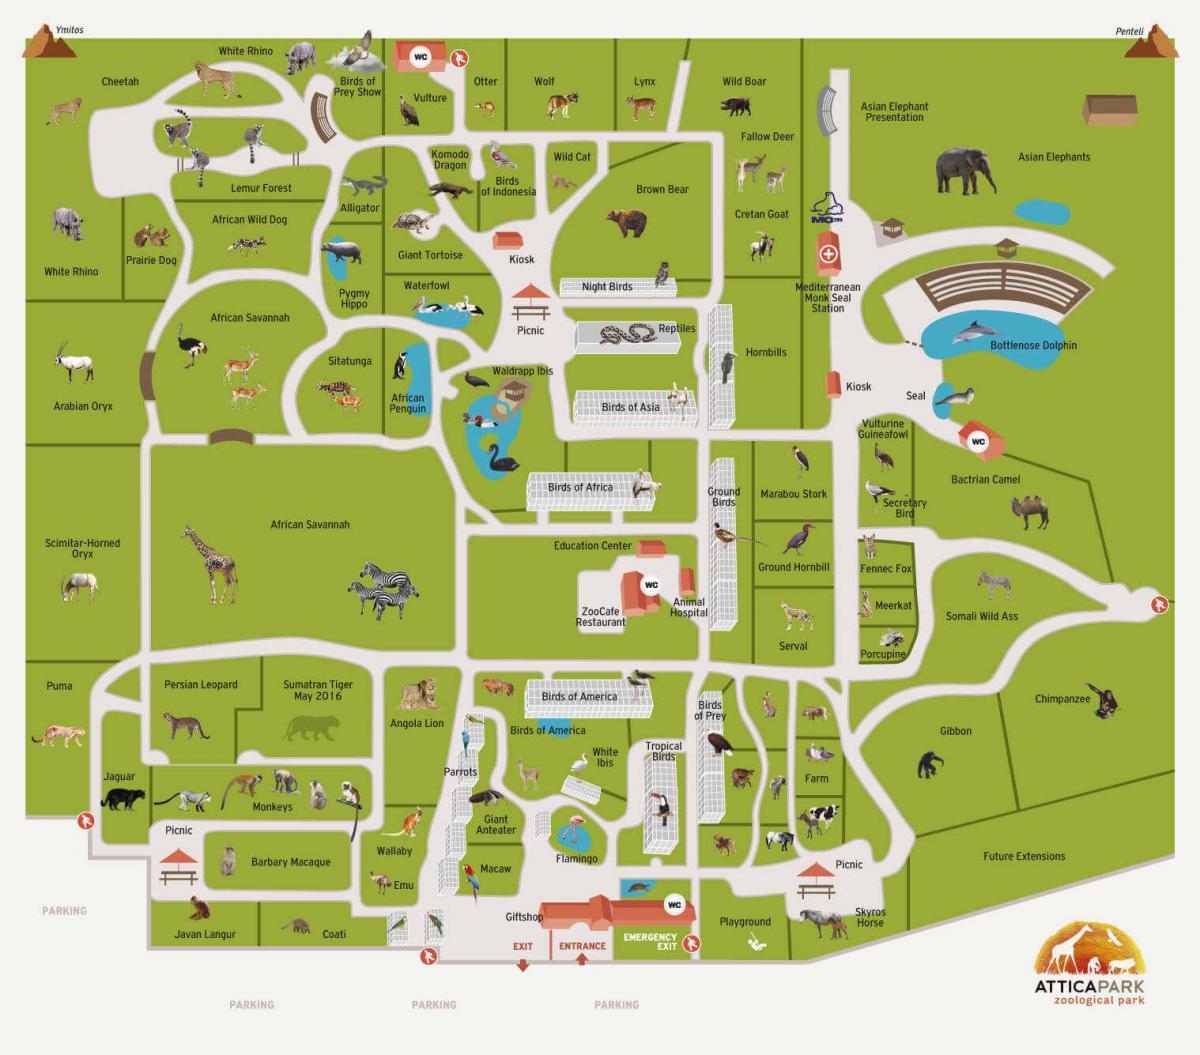 Athens zoo park map